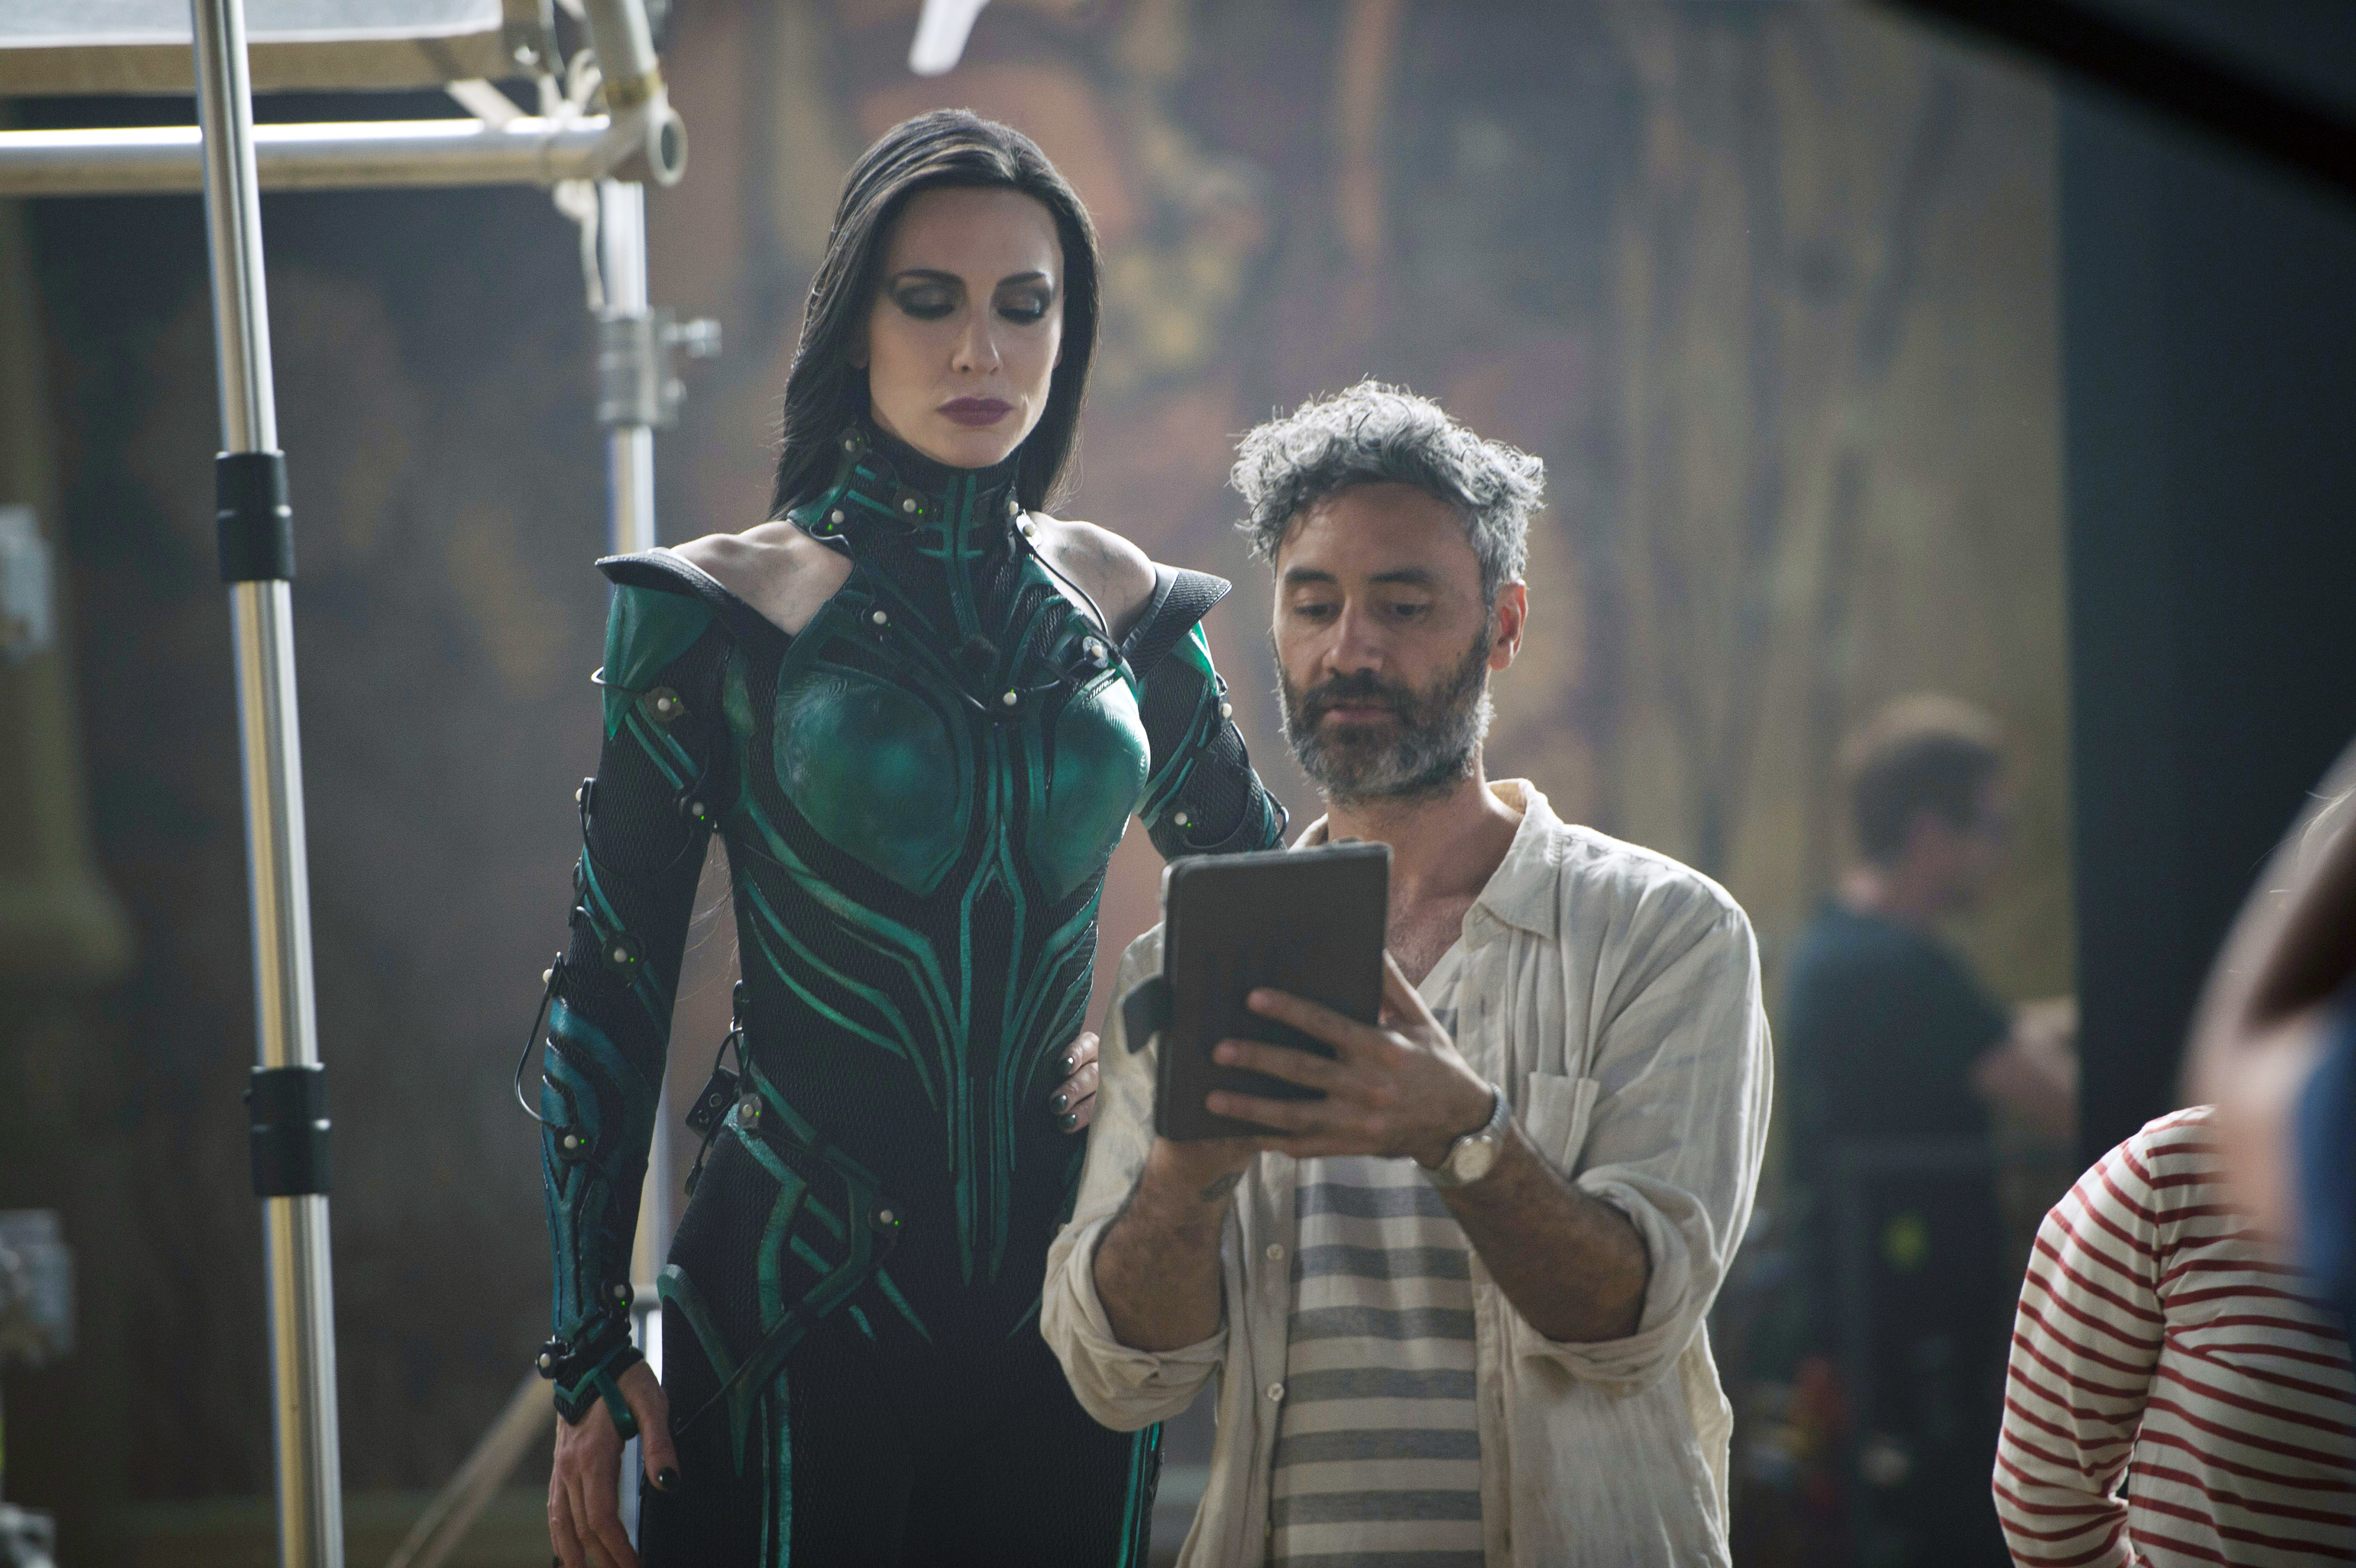 Cate Blanchett in a fitted superhero costume with Taika holding a tablet on a film set